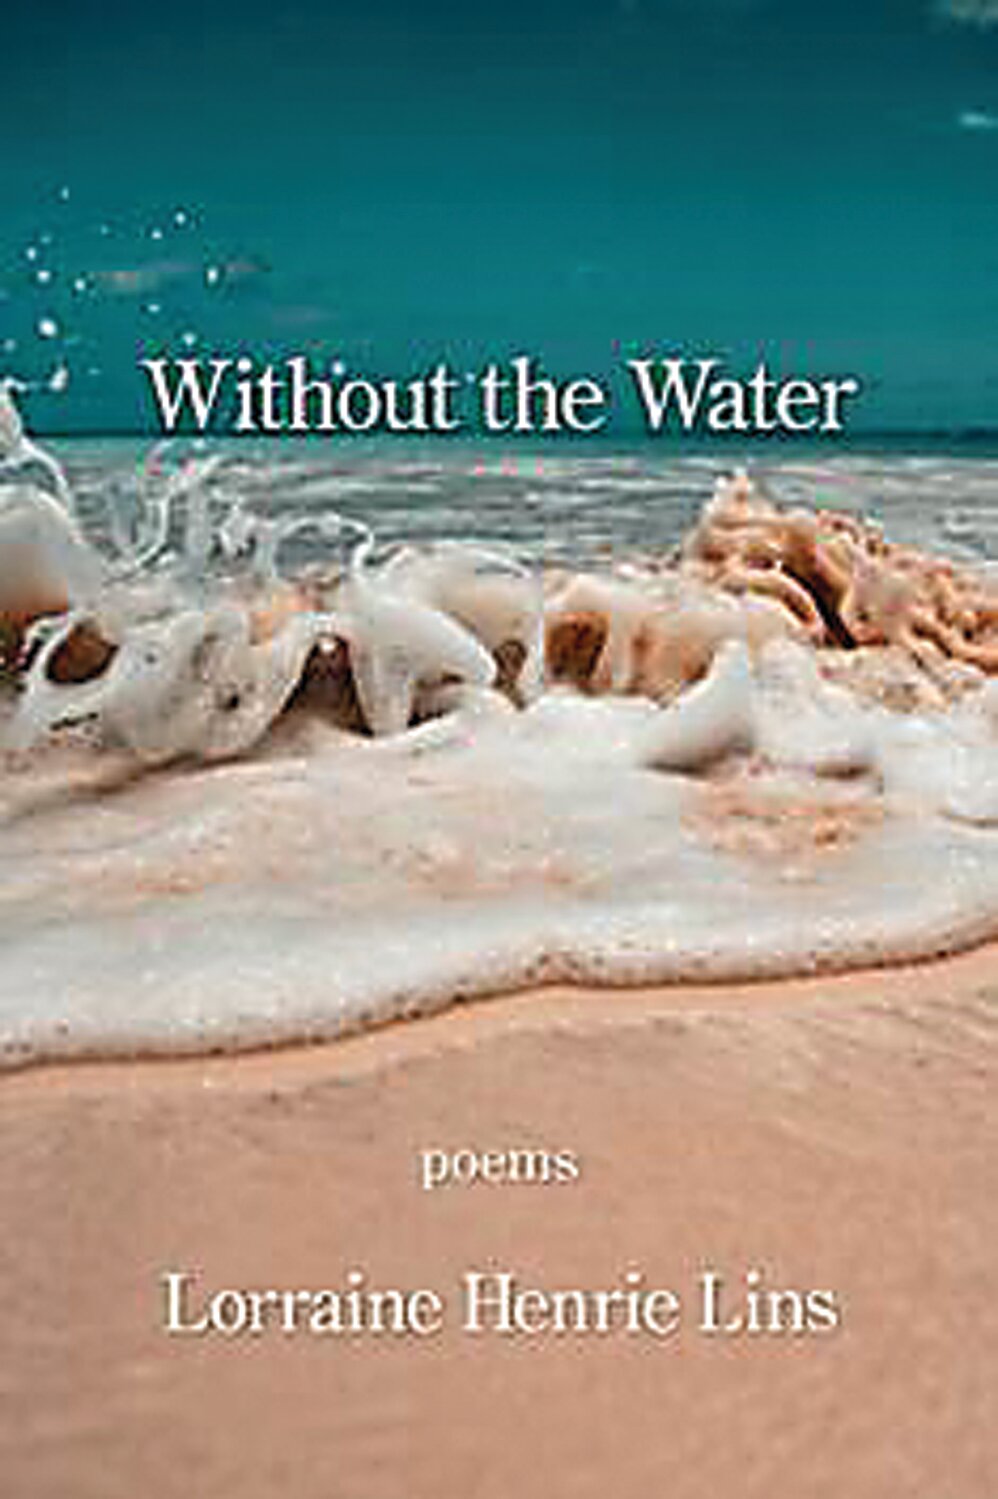 The cover of Bucks County Poet Laureate Lorraine Henrie Lins’ fifth book.